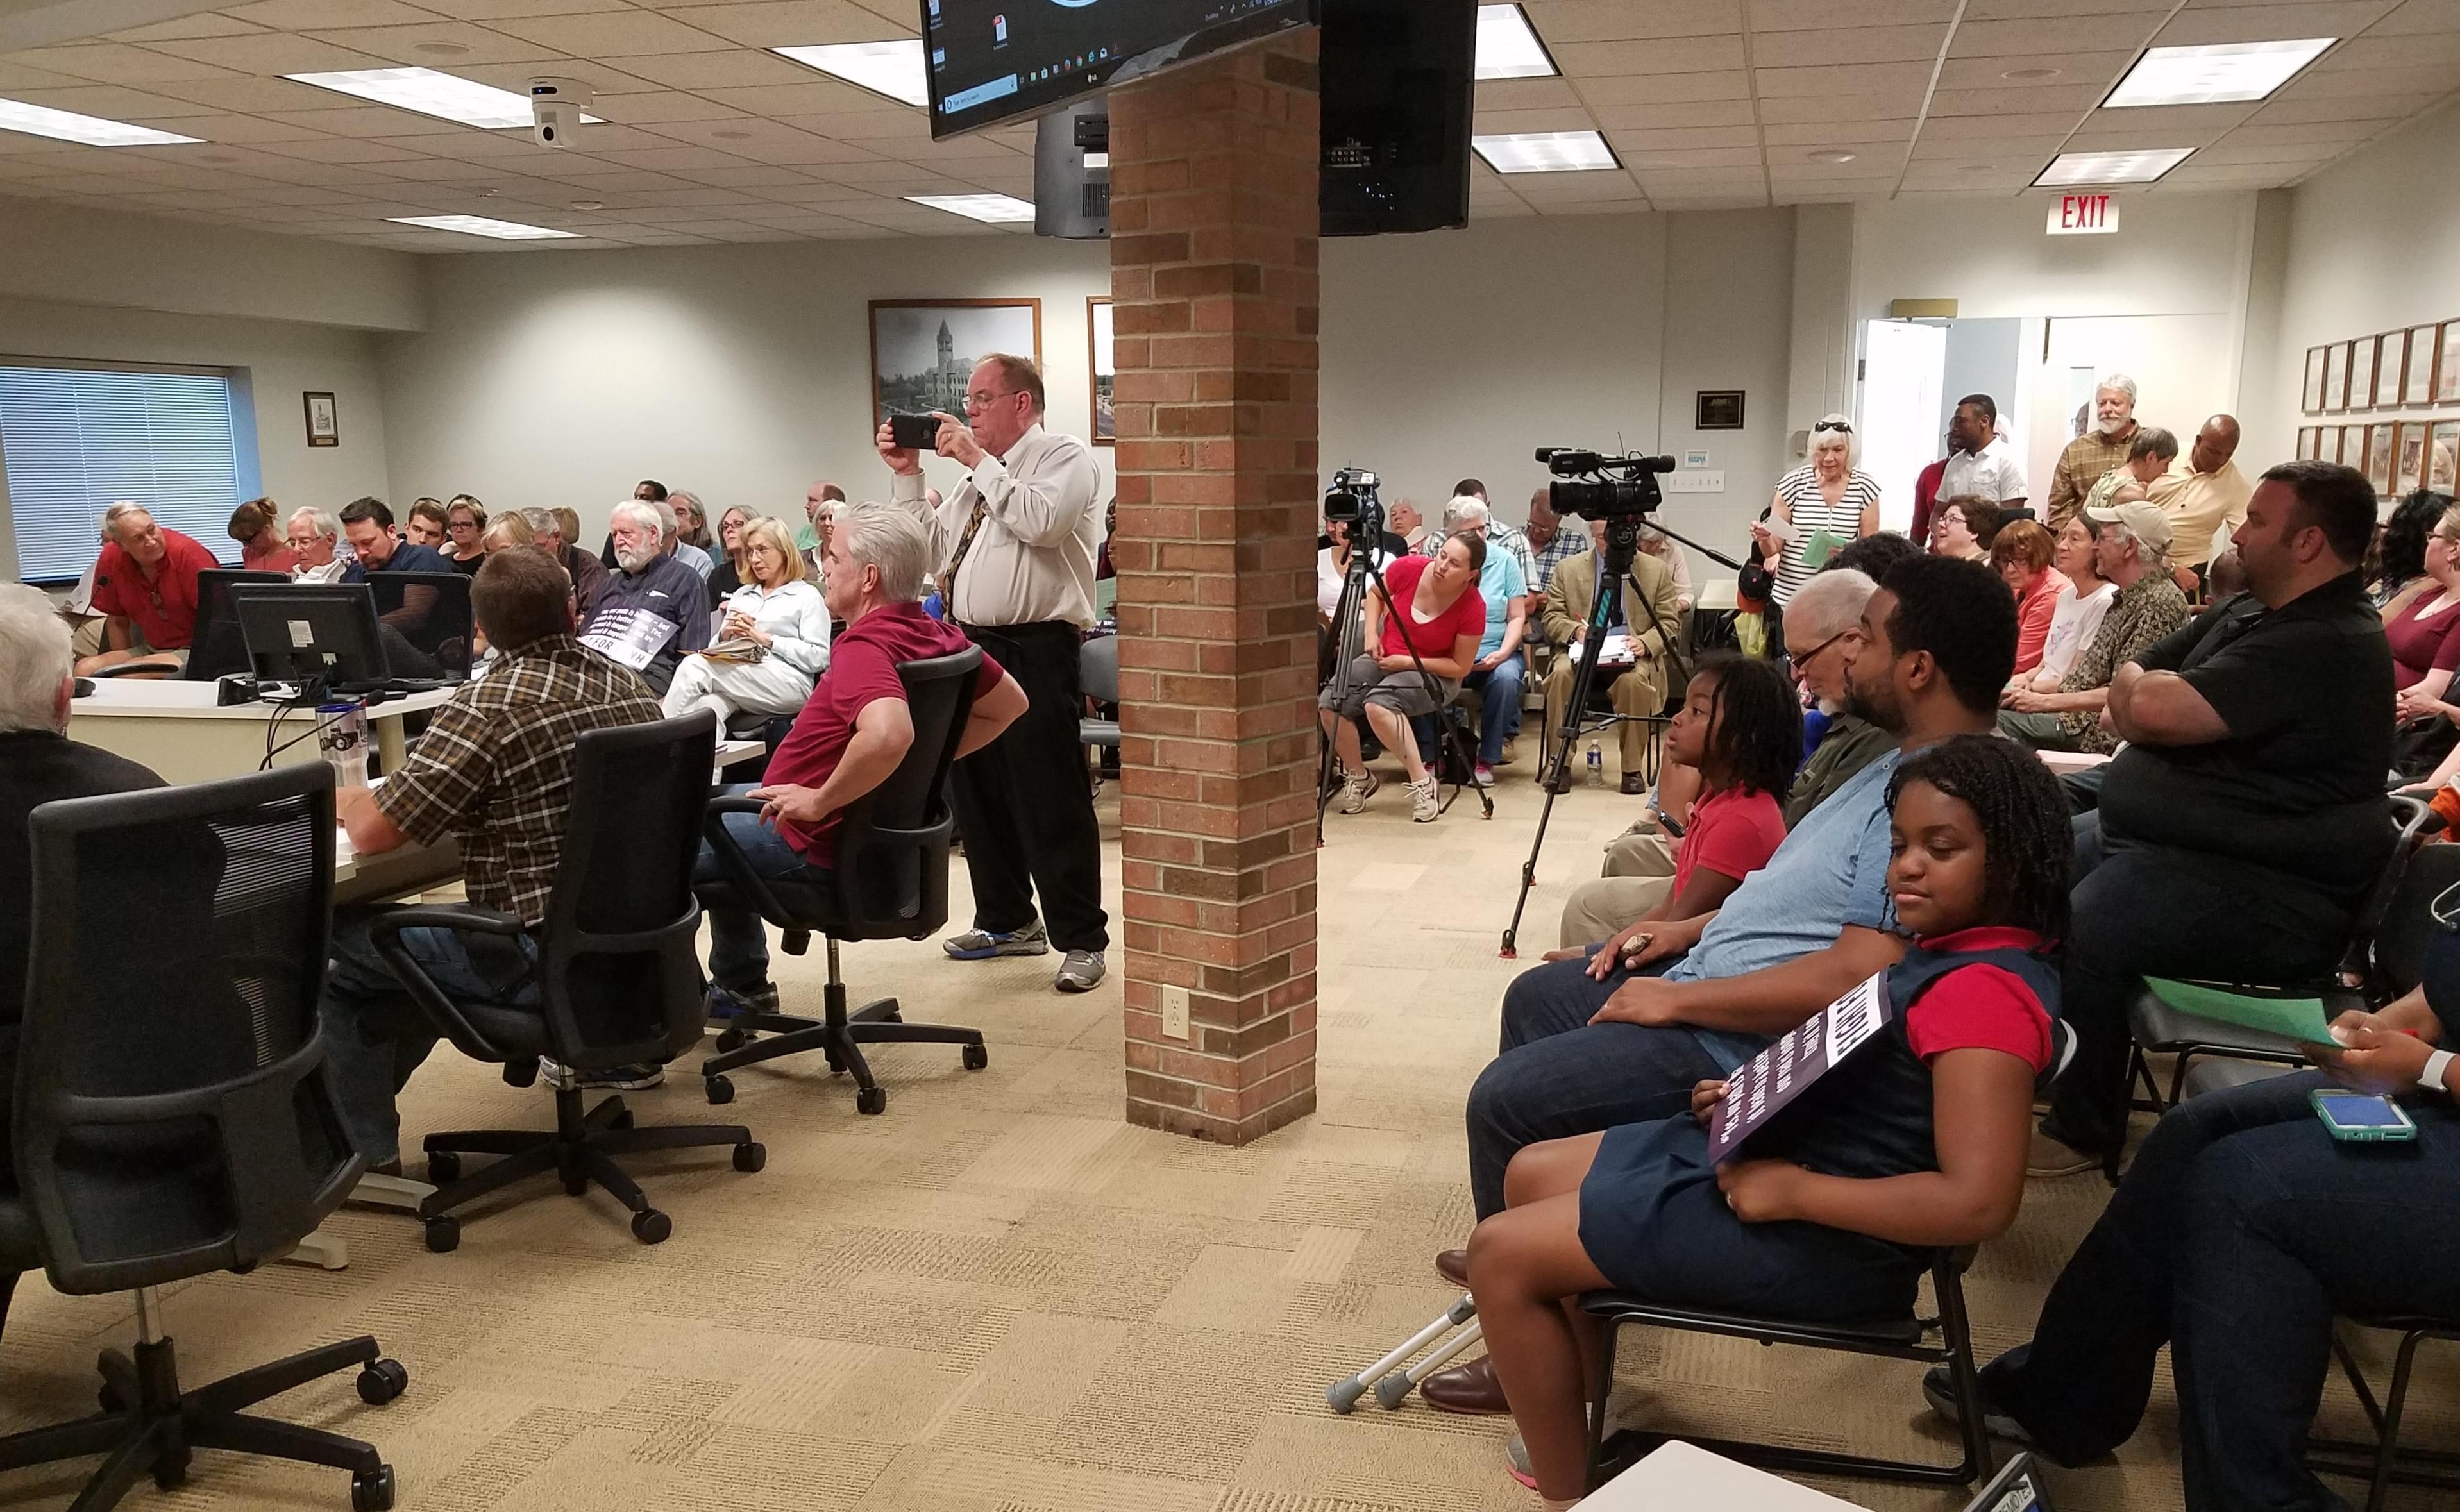 More than 100 people came to the Champaign County Board Room at the Brookens Center in Urbana Tuesday evening.